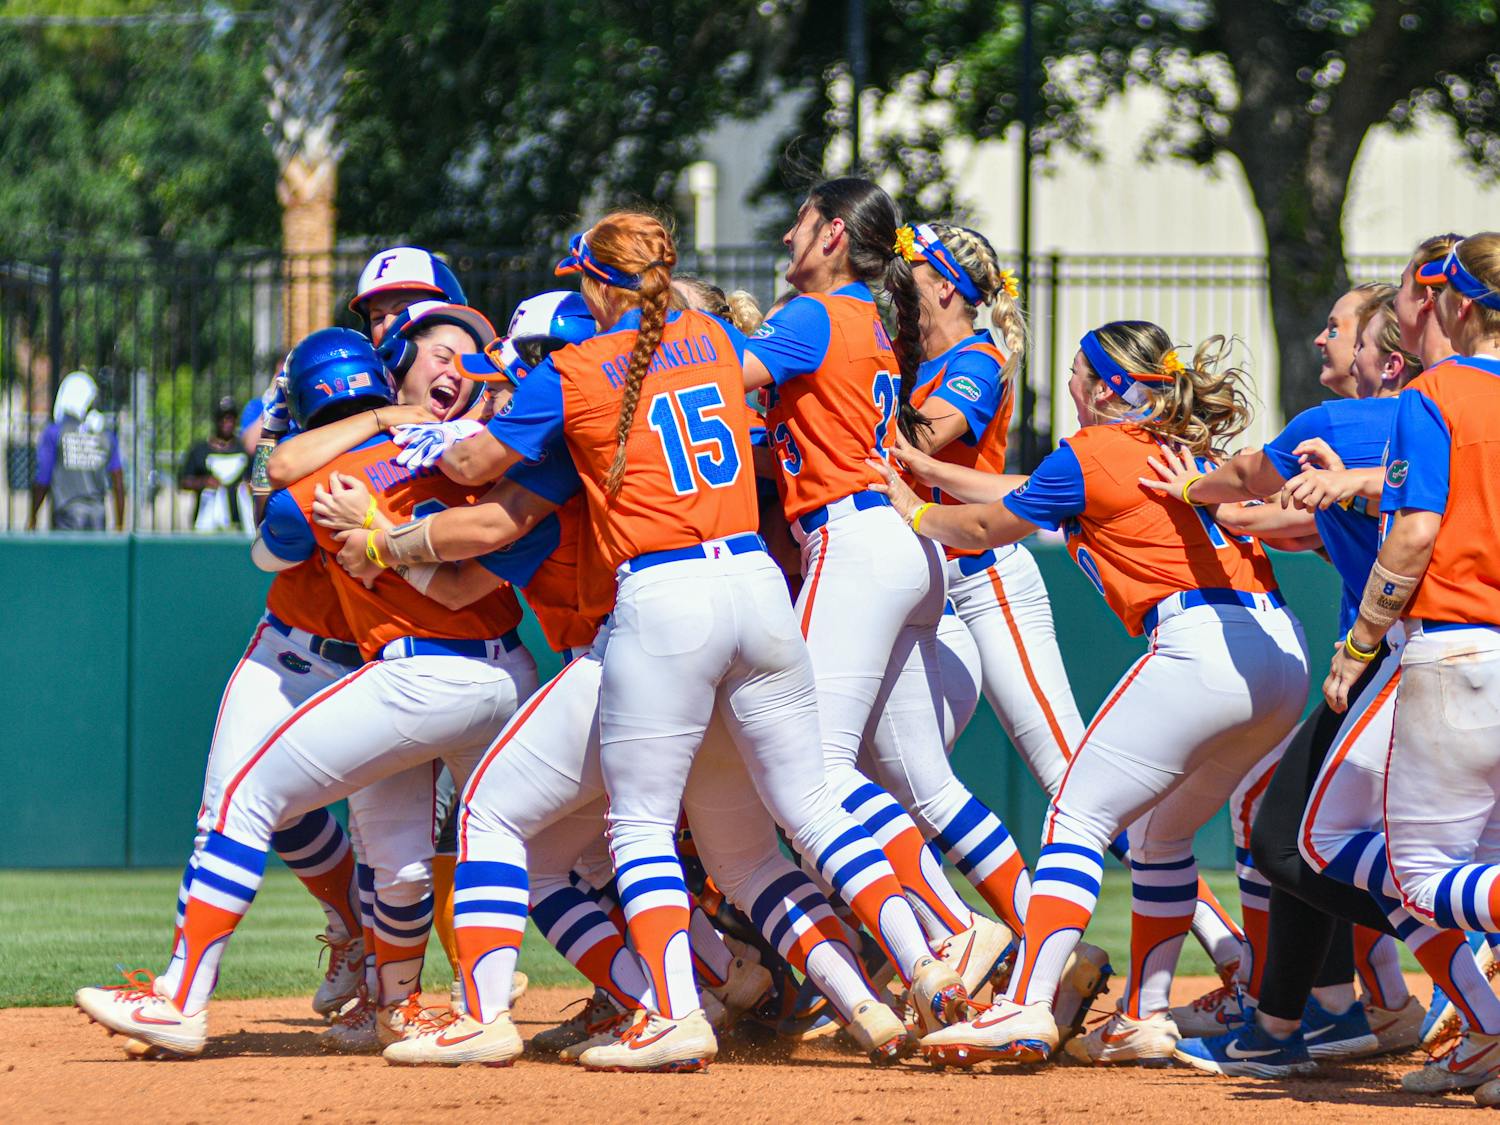 Florida will advance to its third-consecutive Women's College World Series following a walkoff hit from outfielder Jaimie Hoover against the Tennessee Volunteers on Sunday.